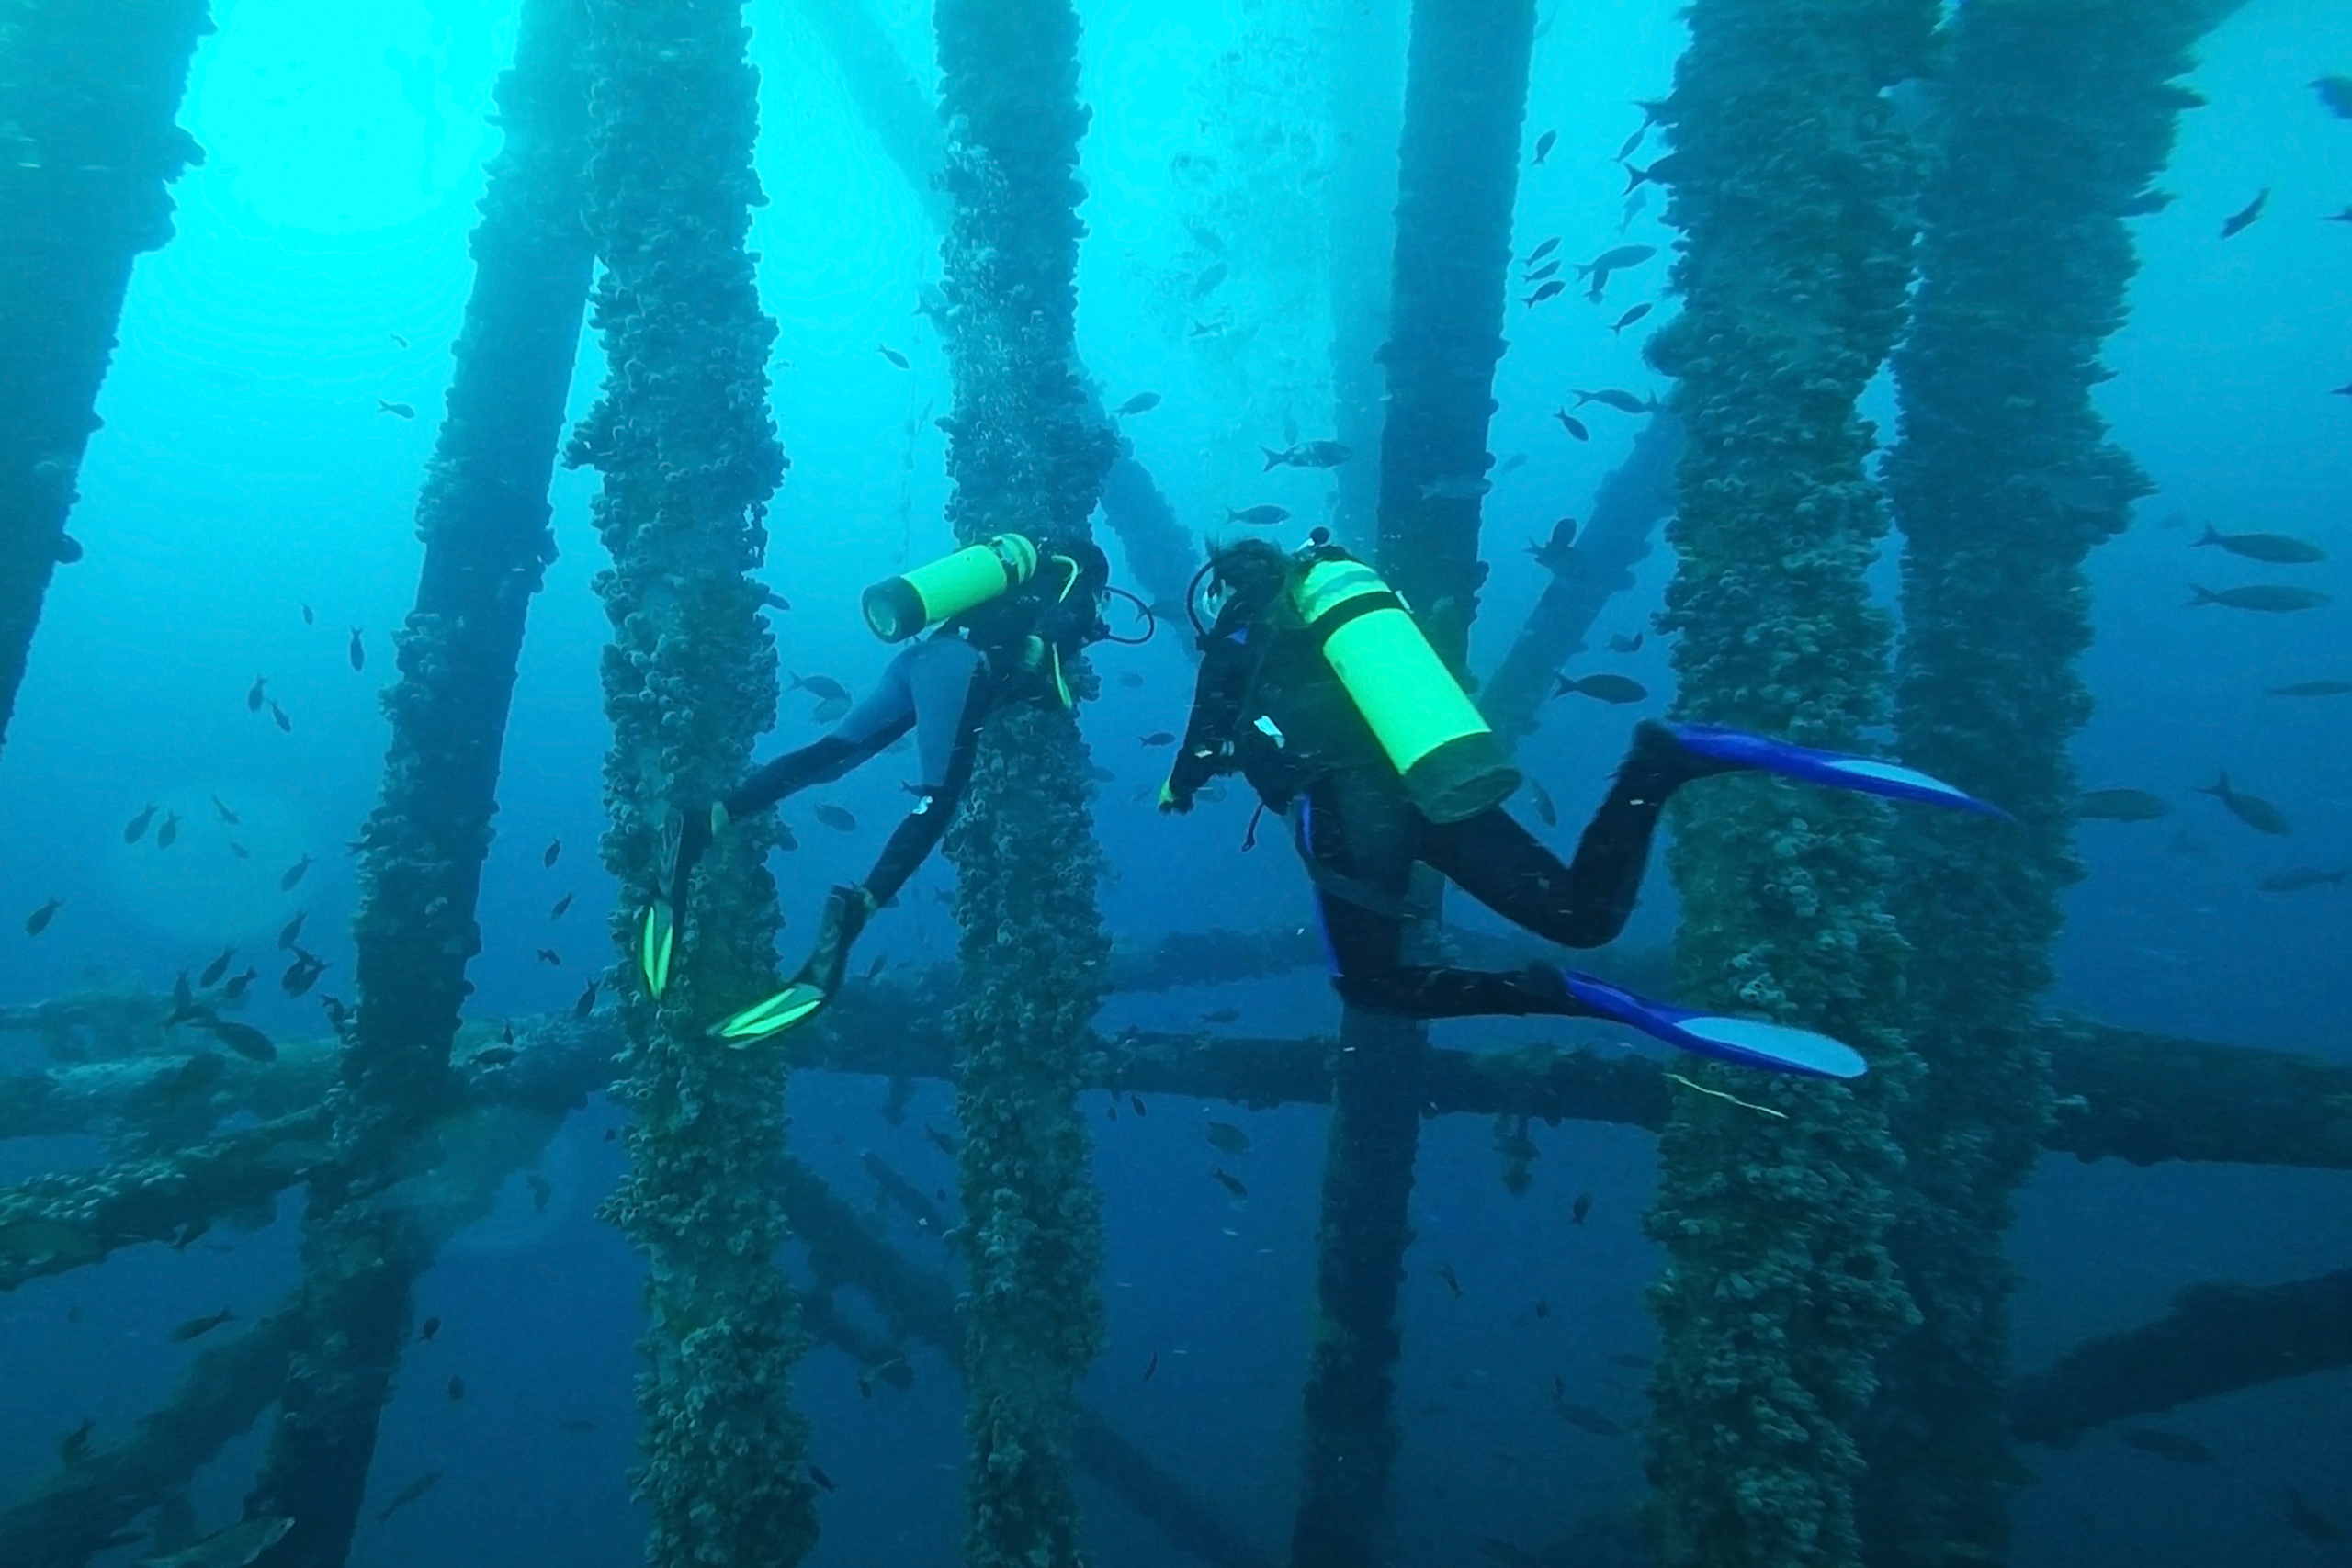 two divers near underwater manmade structure